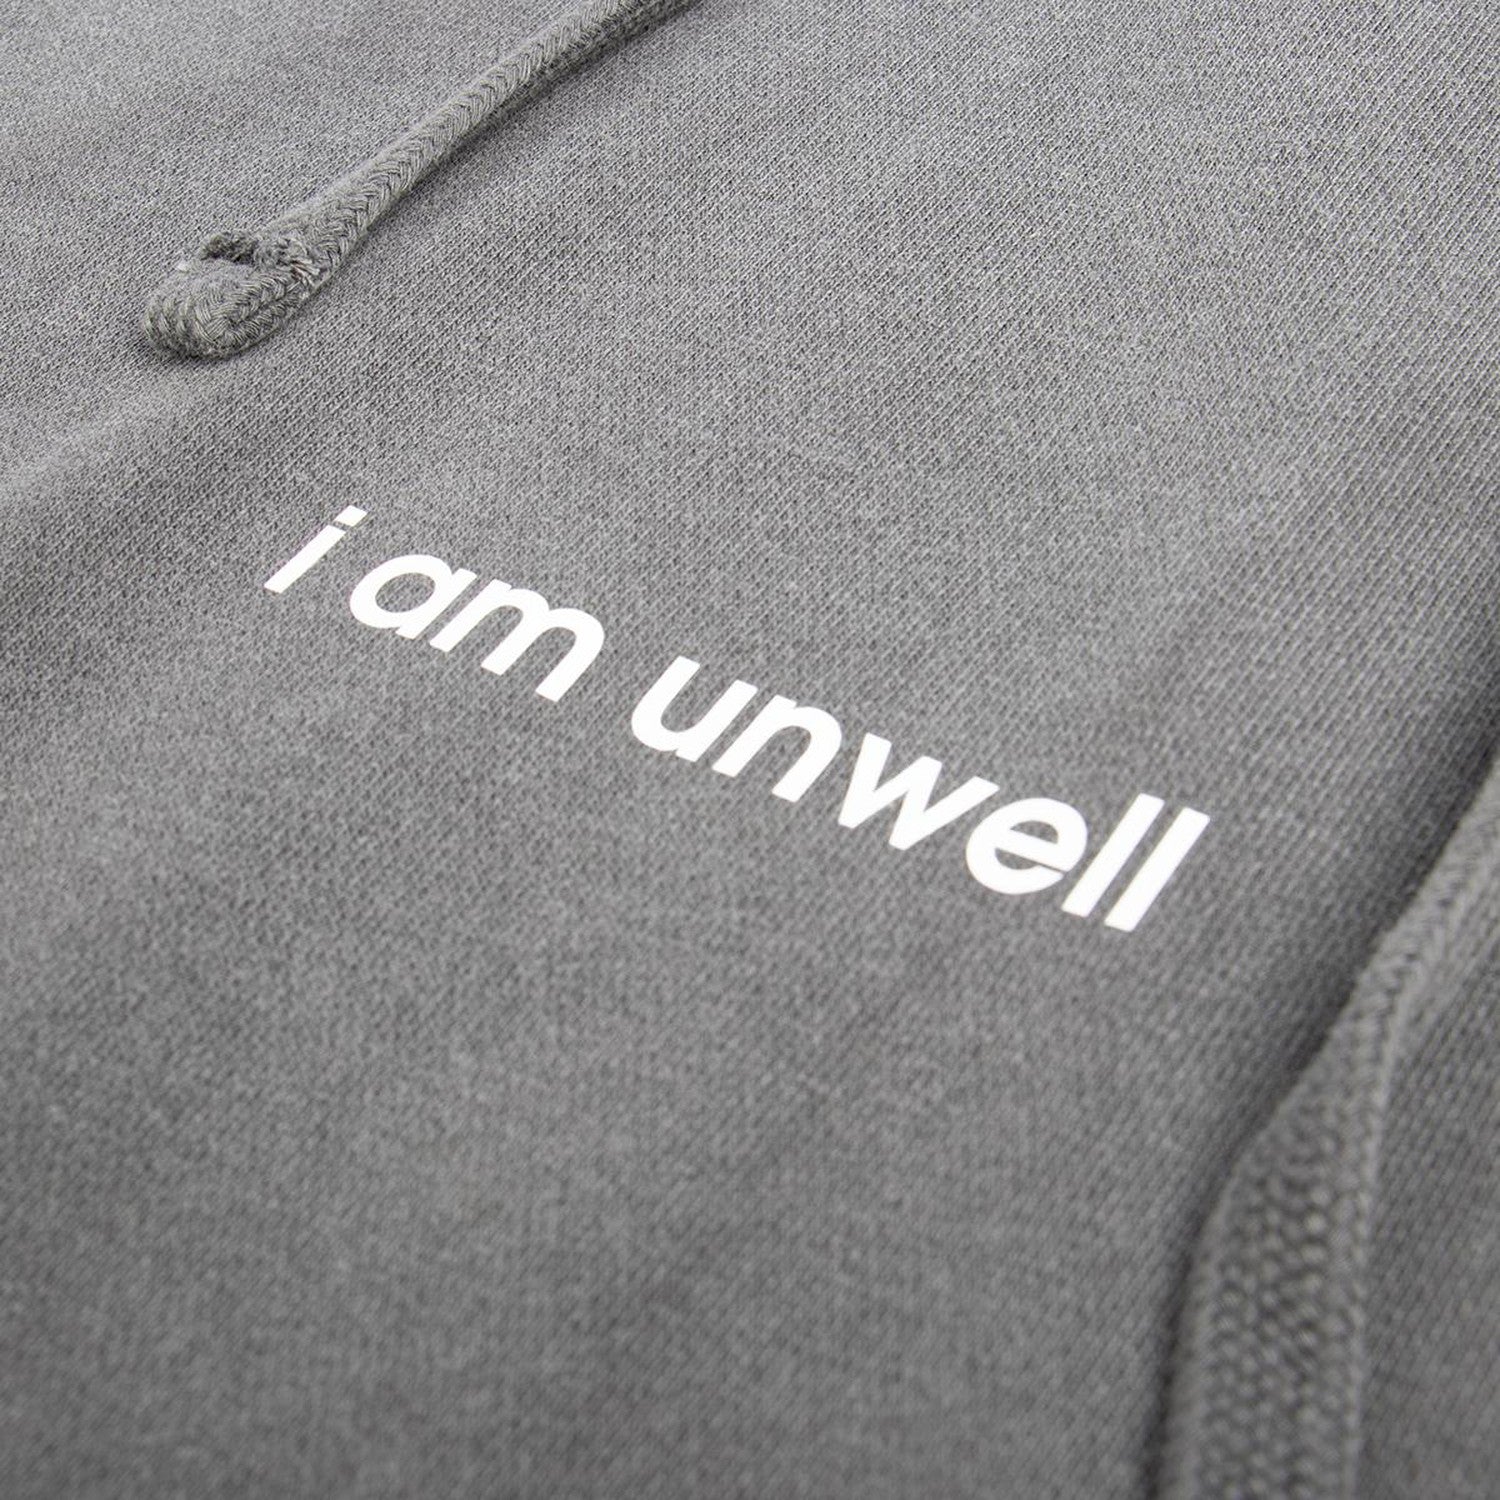 Call her daddy. Call her Daddy i am unwell одежда. Unwell. I am enough Hoodie.